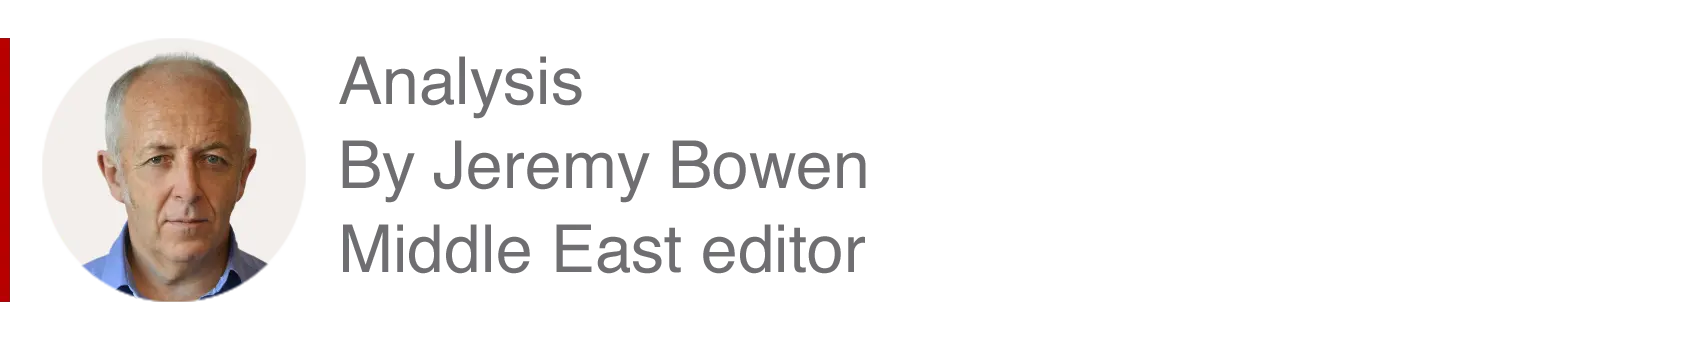 Analysis box by Jeremy Bowen, Middle East editor